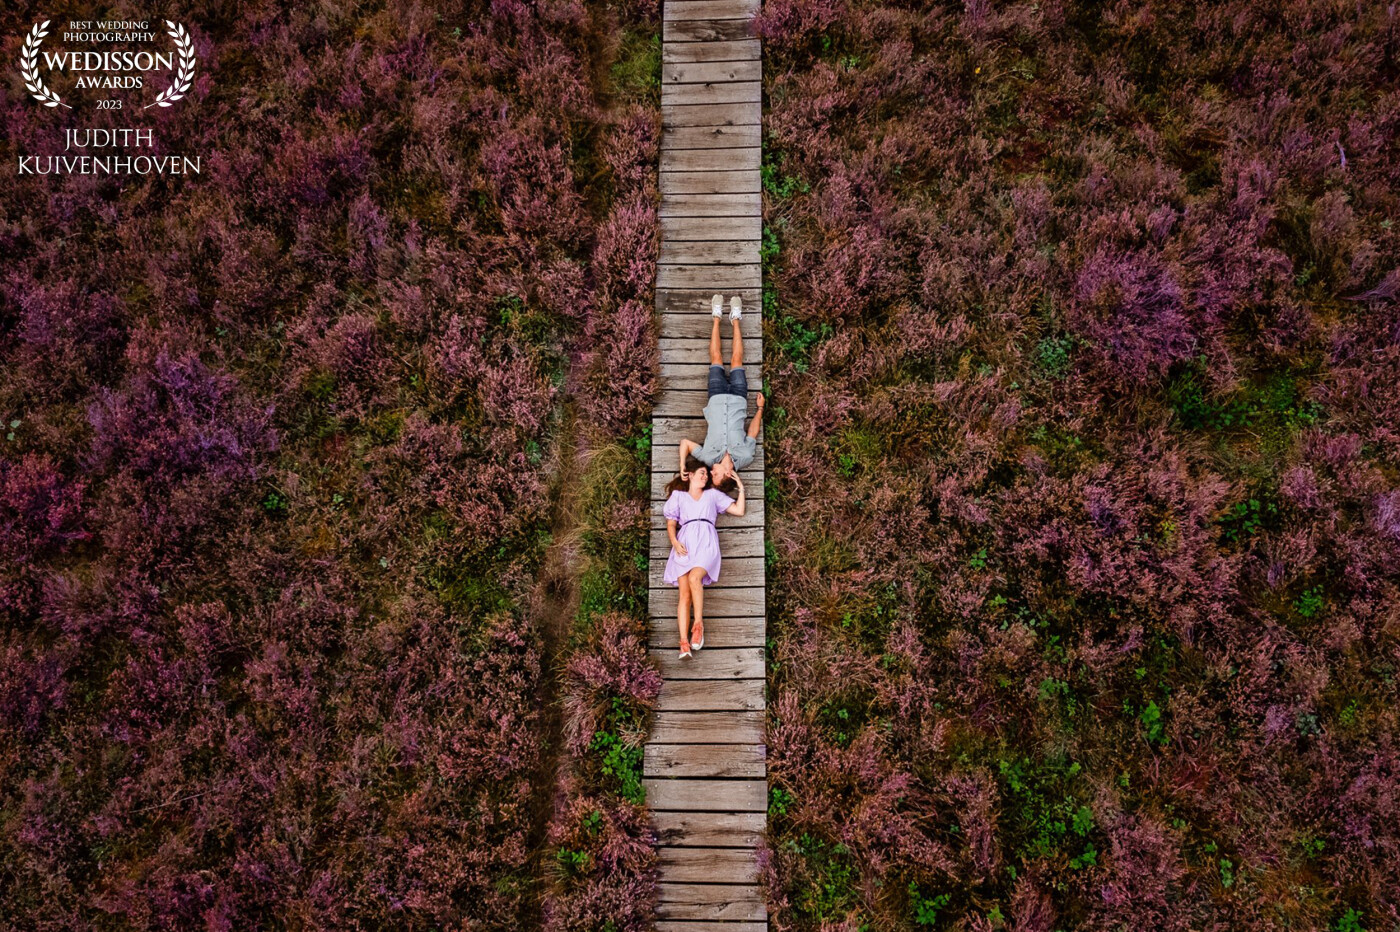 During the pre-wedding shoot of this soon to be wedding couple, we used a drone to capture the beautiful heathland.